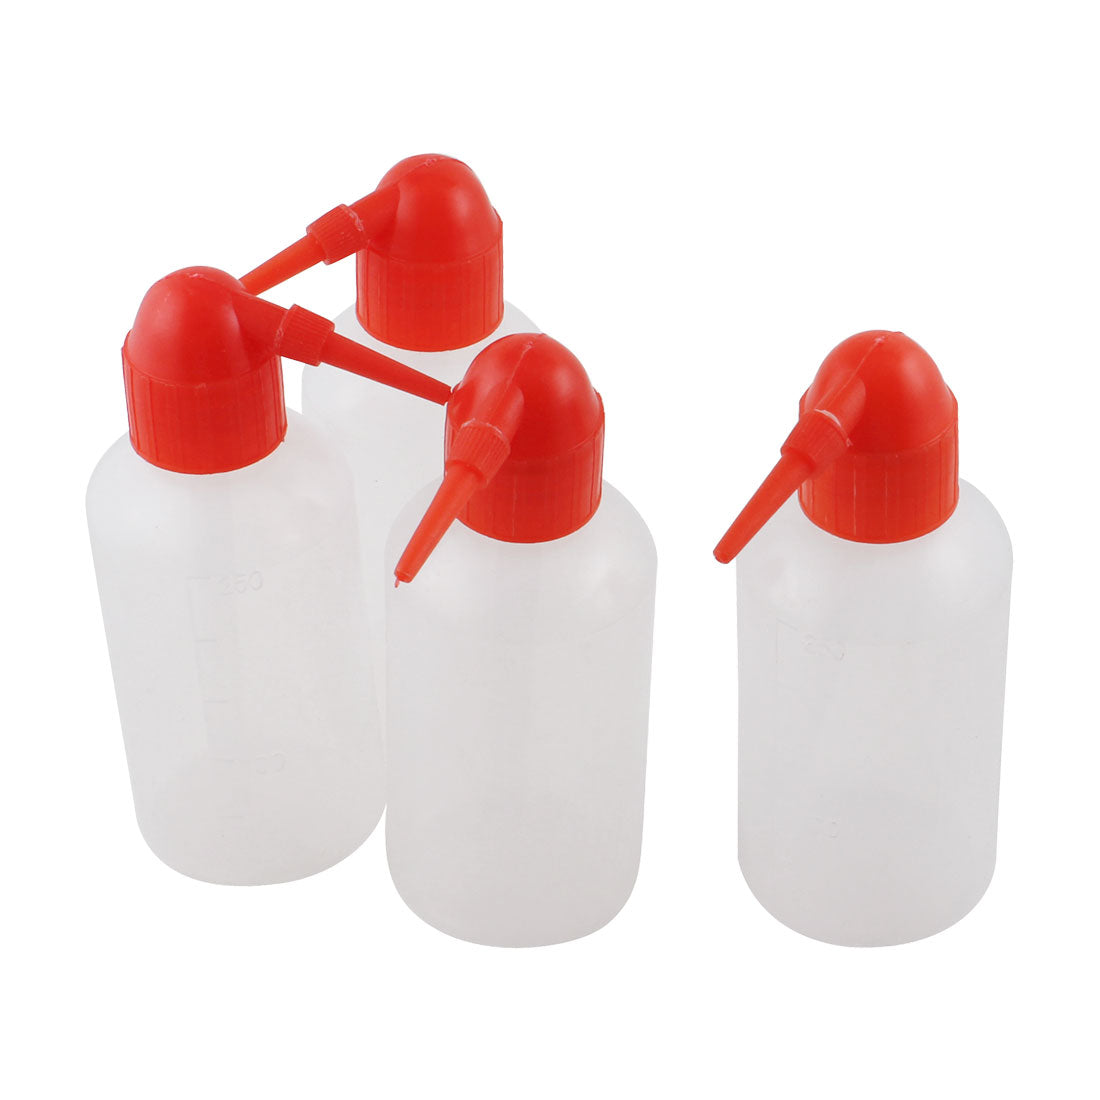 uxcell Uxcell 4PCS 250mL 8oz Red Tip Clear White Plastic Cylindrical Tattoo Wash Cleaning Chemical Reagent Alcohol Squeeze Bottle